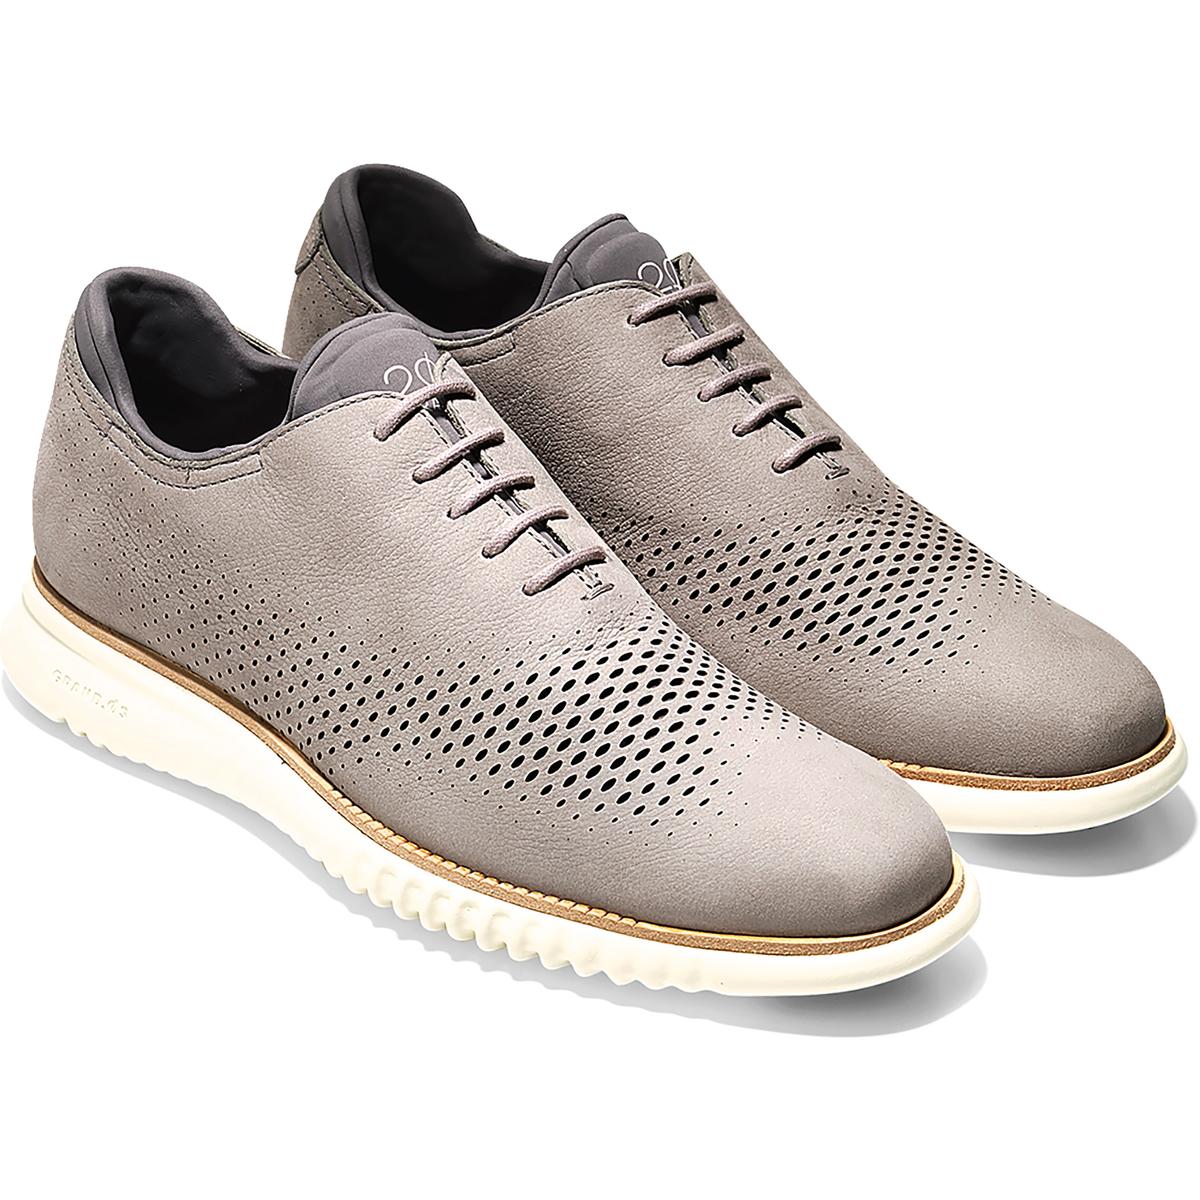 Cole Haan Mens 2 Zerogrand Gray Leather Oxfords Shoes 11 Medium (D ...